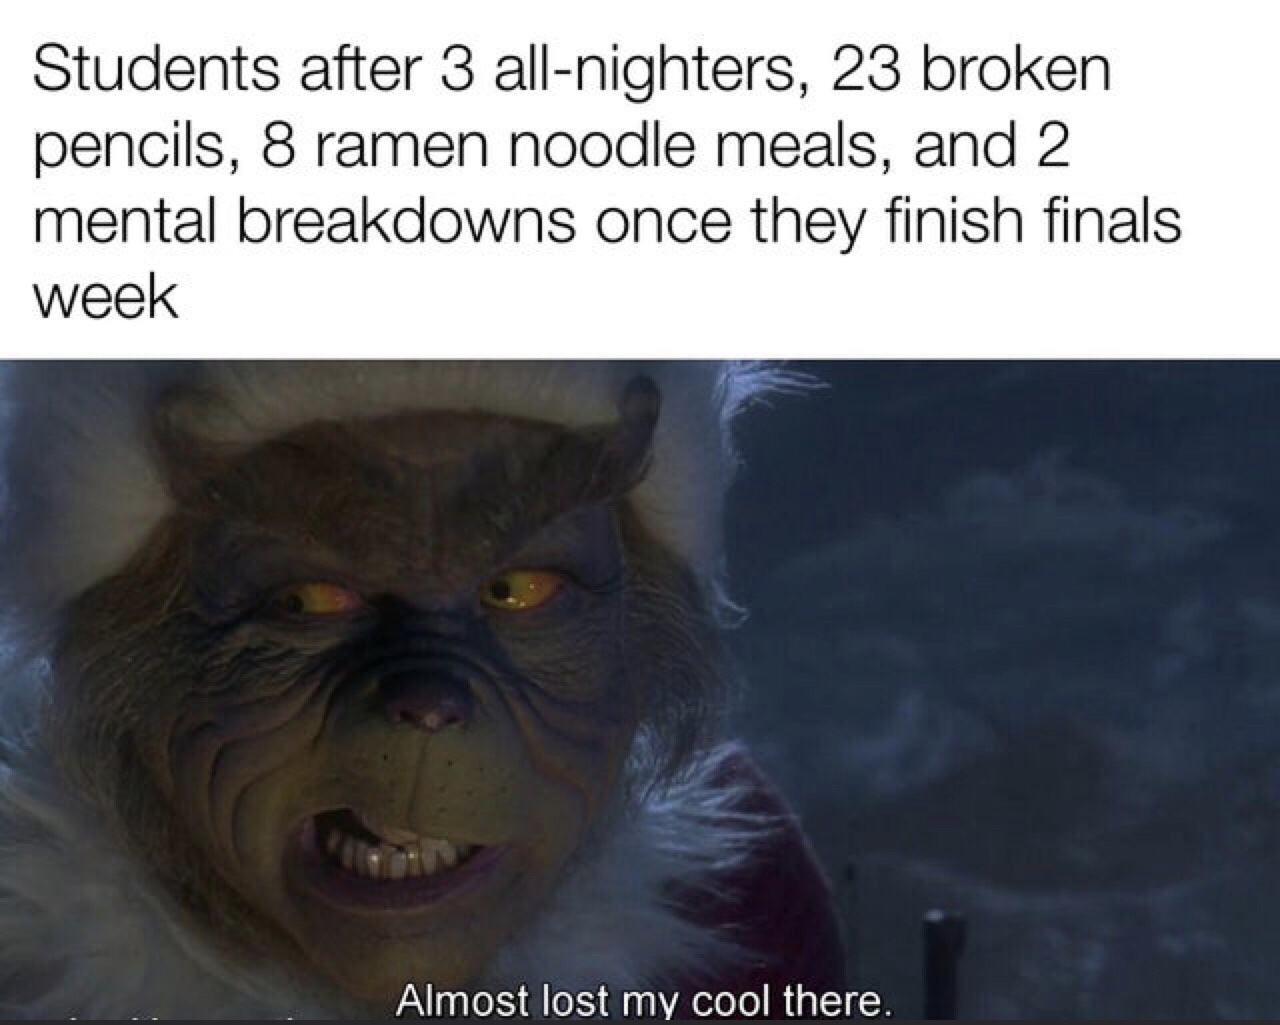 Mishimoto - Students after 3 allnighters, 23 broken pencils, 8 ramen noodle meals, and 2 mental breakdowns once they finish finals week Almost lost my cool there.